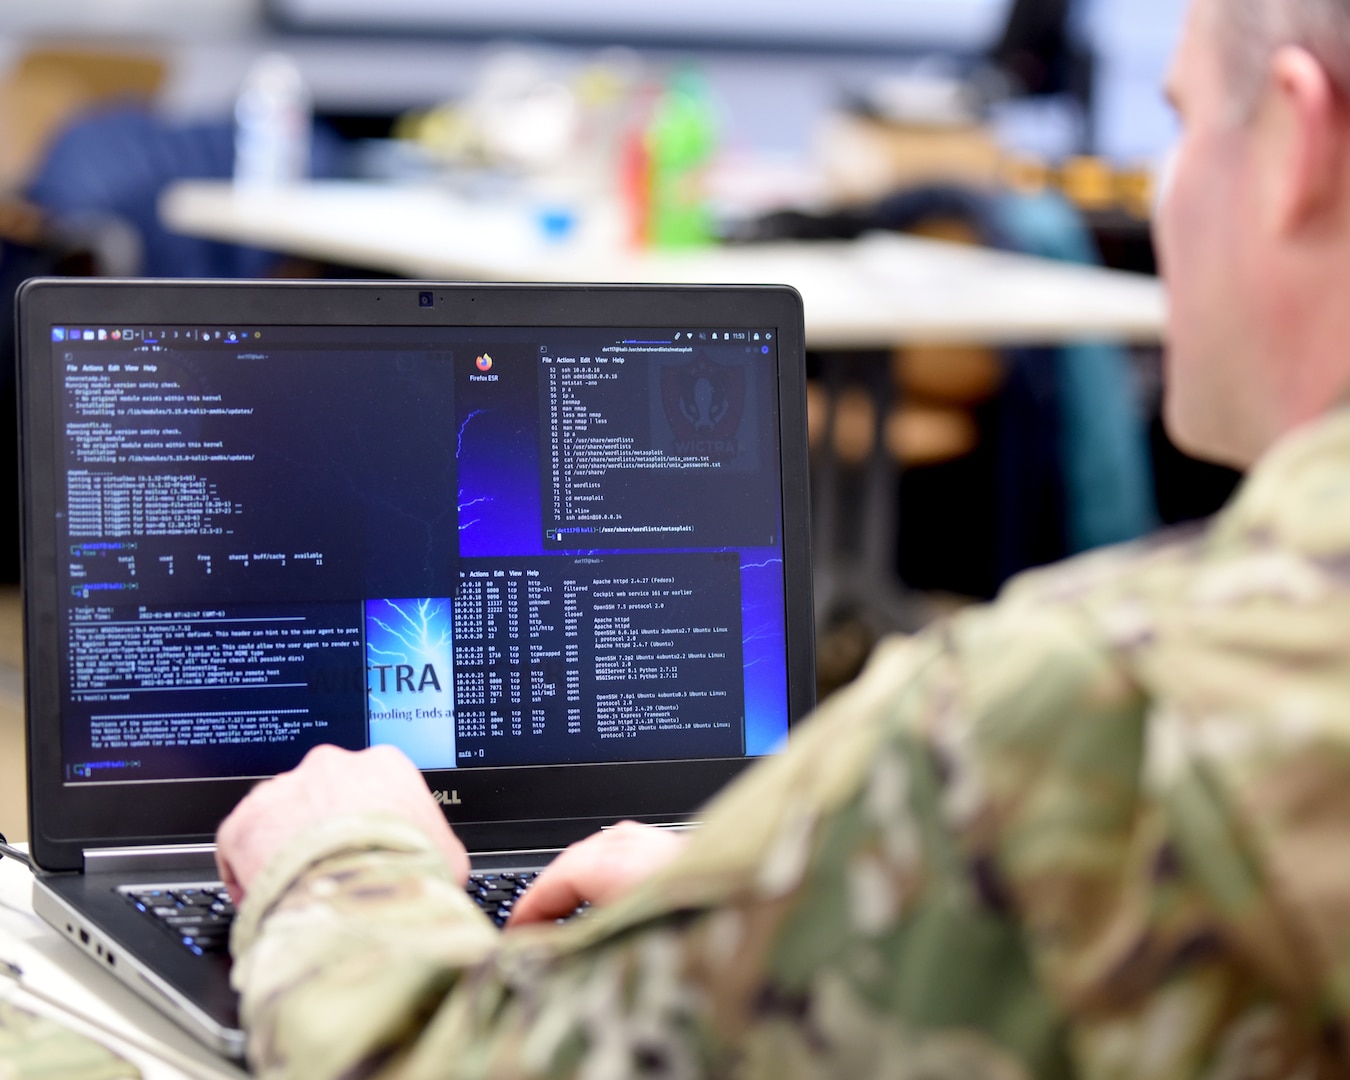 U.S. Air Force Capt. Shannon Bender, 272nd Cyber Operations Squadron, 110th Wing, Michigan Air National Guard, reviews computer information during a cyber warfare training event, Camp Grayling Joint Maneuver Training Center, Michigan, March 8, 2022.